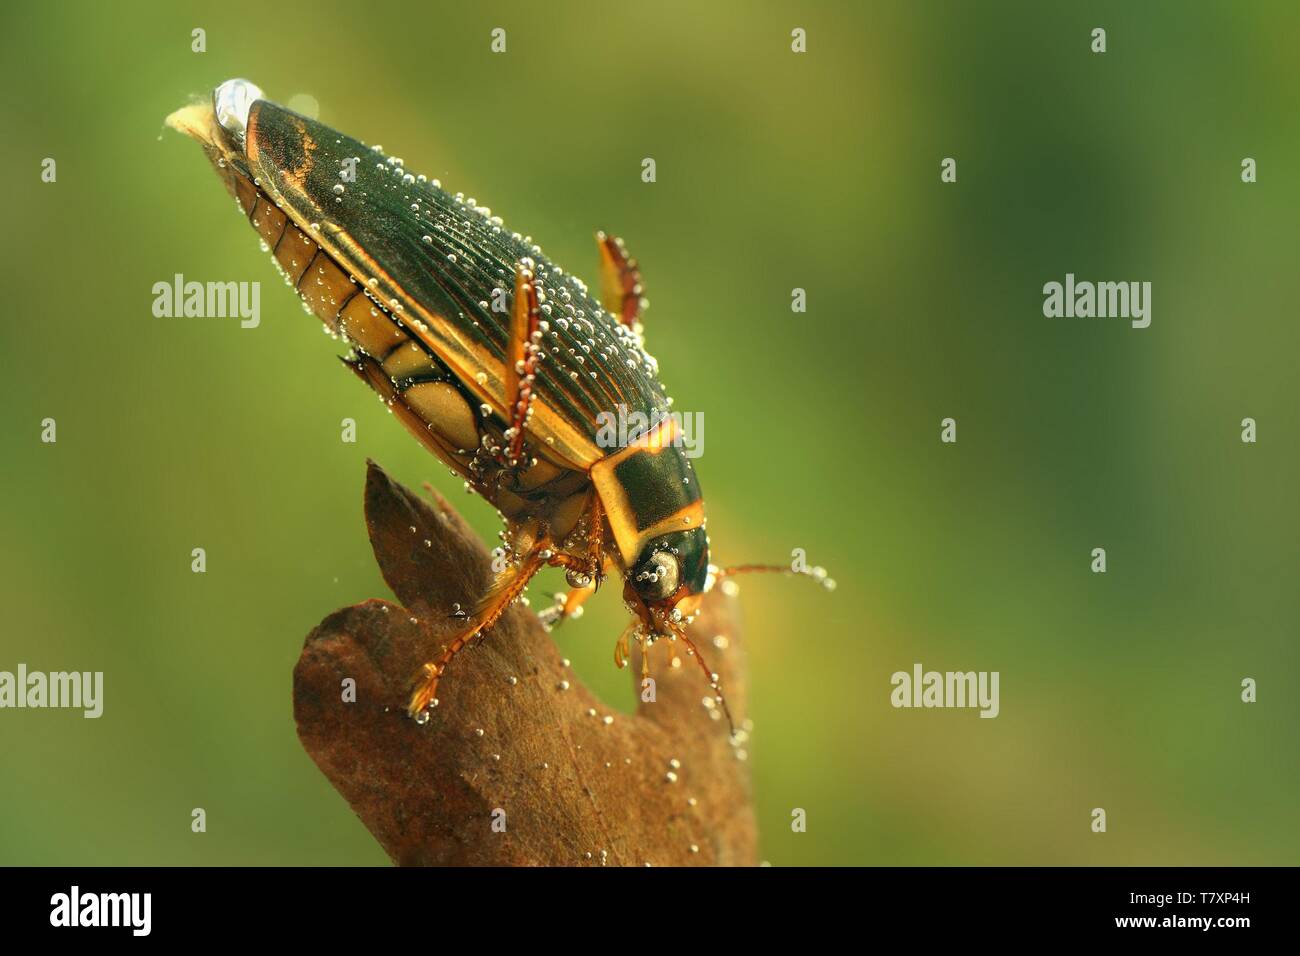 The Great diving Beetle - Dytiscus marginalis - under water hunting. Stock Photo